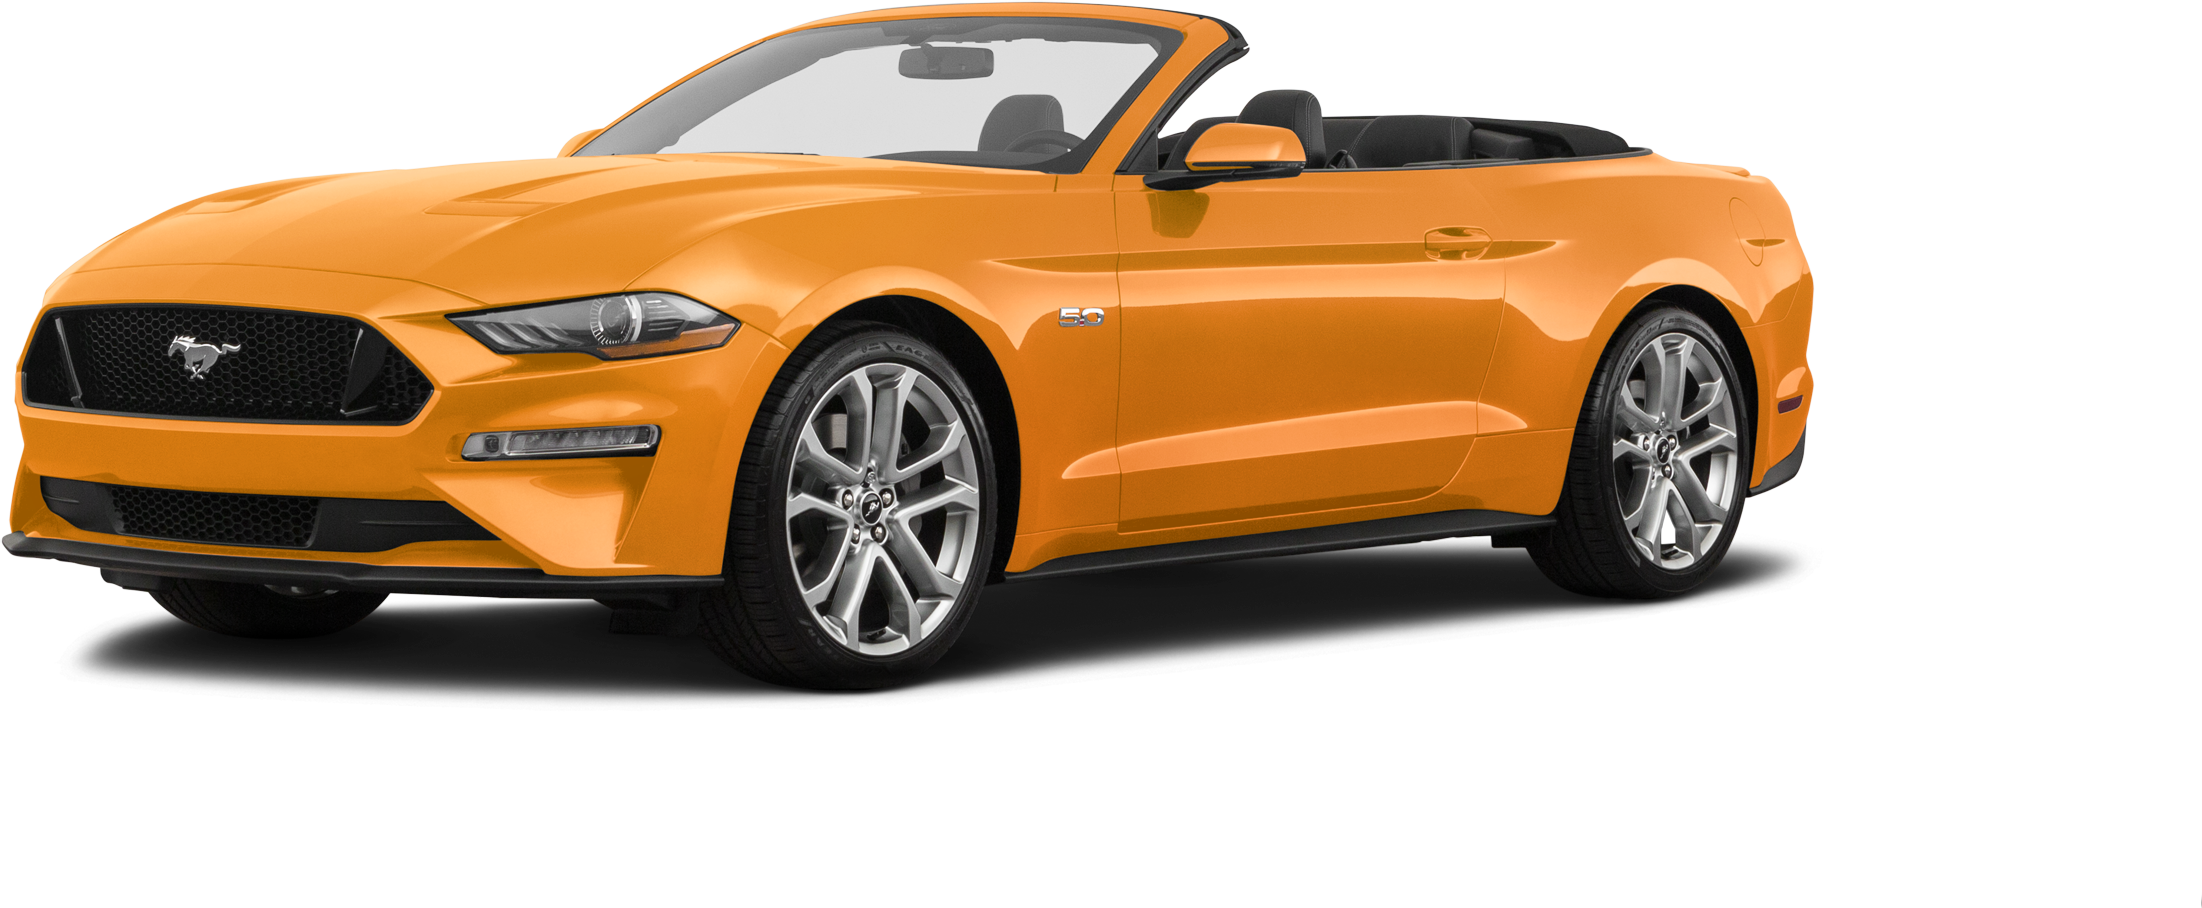 https://file.kelleybluebookimages.com/kbb/base/evox/CP/13748/2019-Ford-Mustang-front_13748_032_2202x908_NL_cropped.png